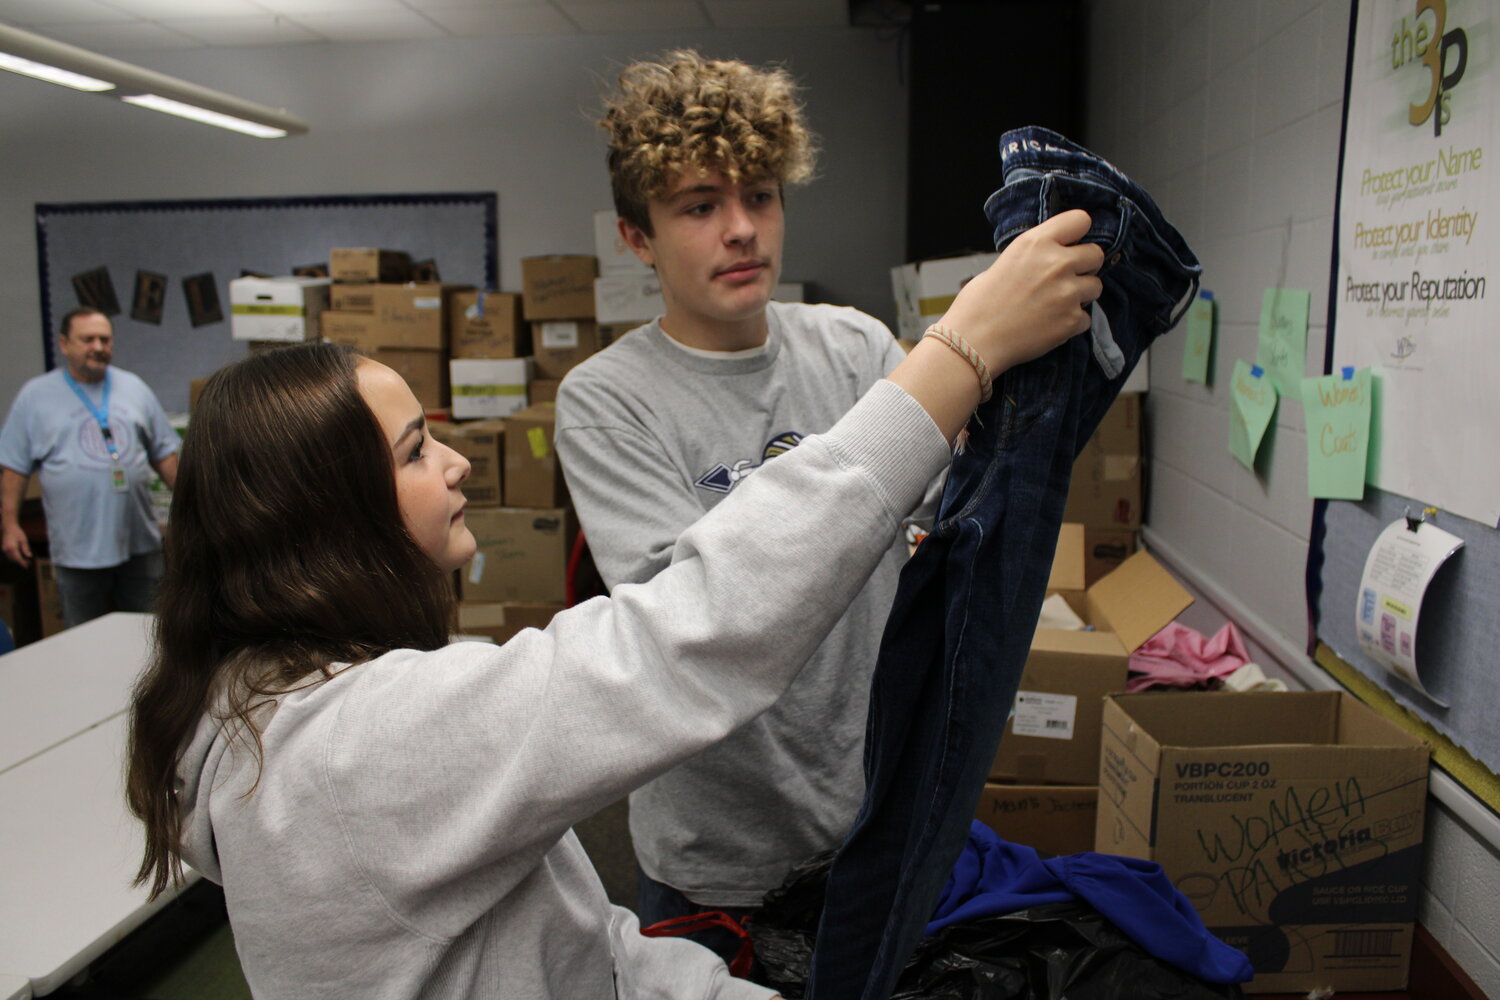 Wentzville Middle School students McKenzie Fry and Logan Van Scoy pull a pair of blue jeans from a bag Nov. 17 as they sort through a donation of clothes for homeless veterans as Truesdale mayor and middle school student council sponsor Jerry Cannon watches from the background.